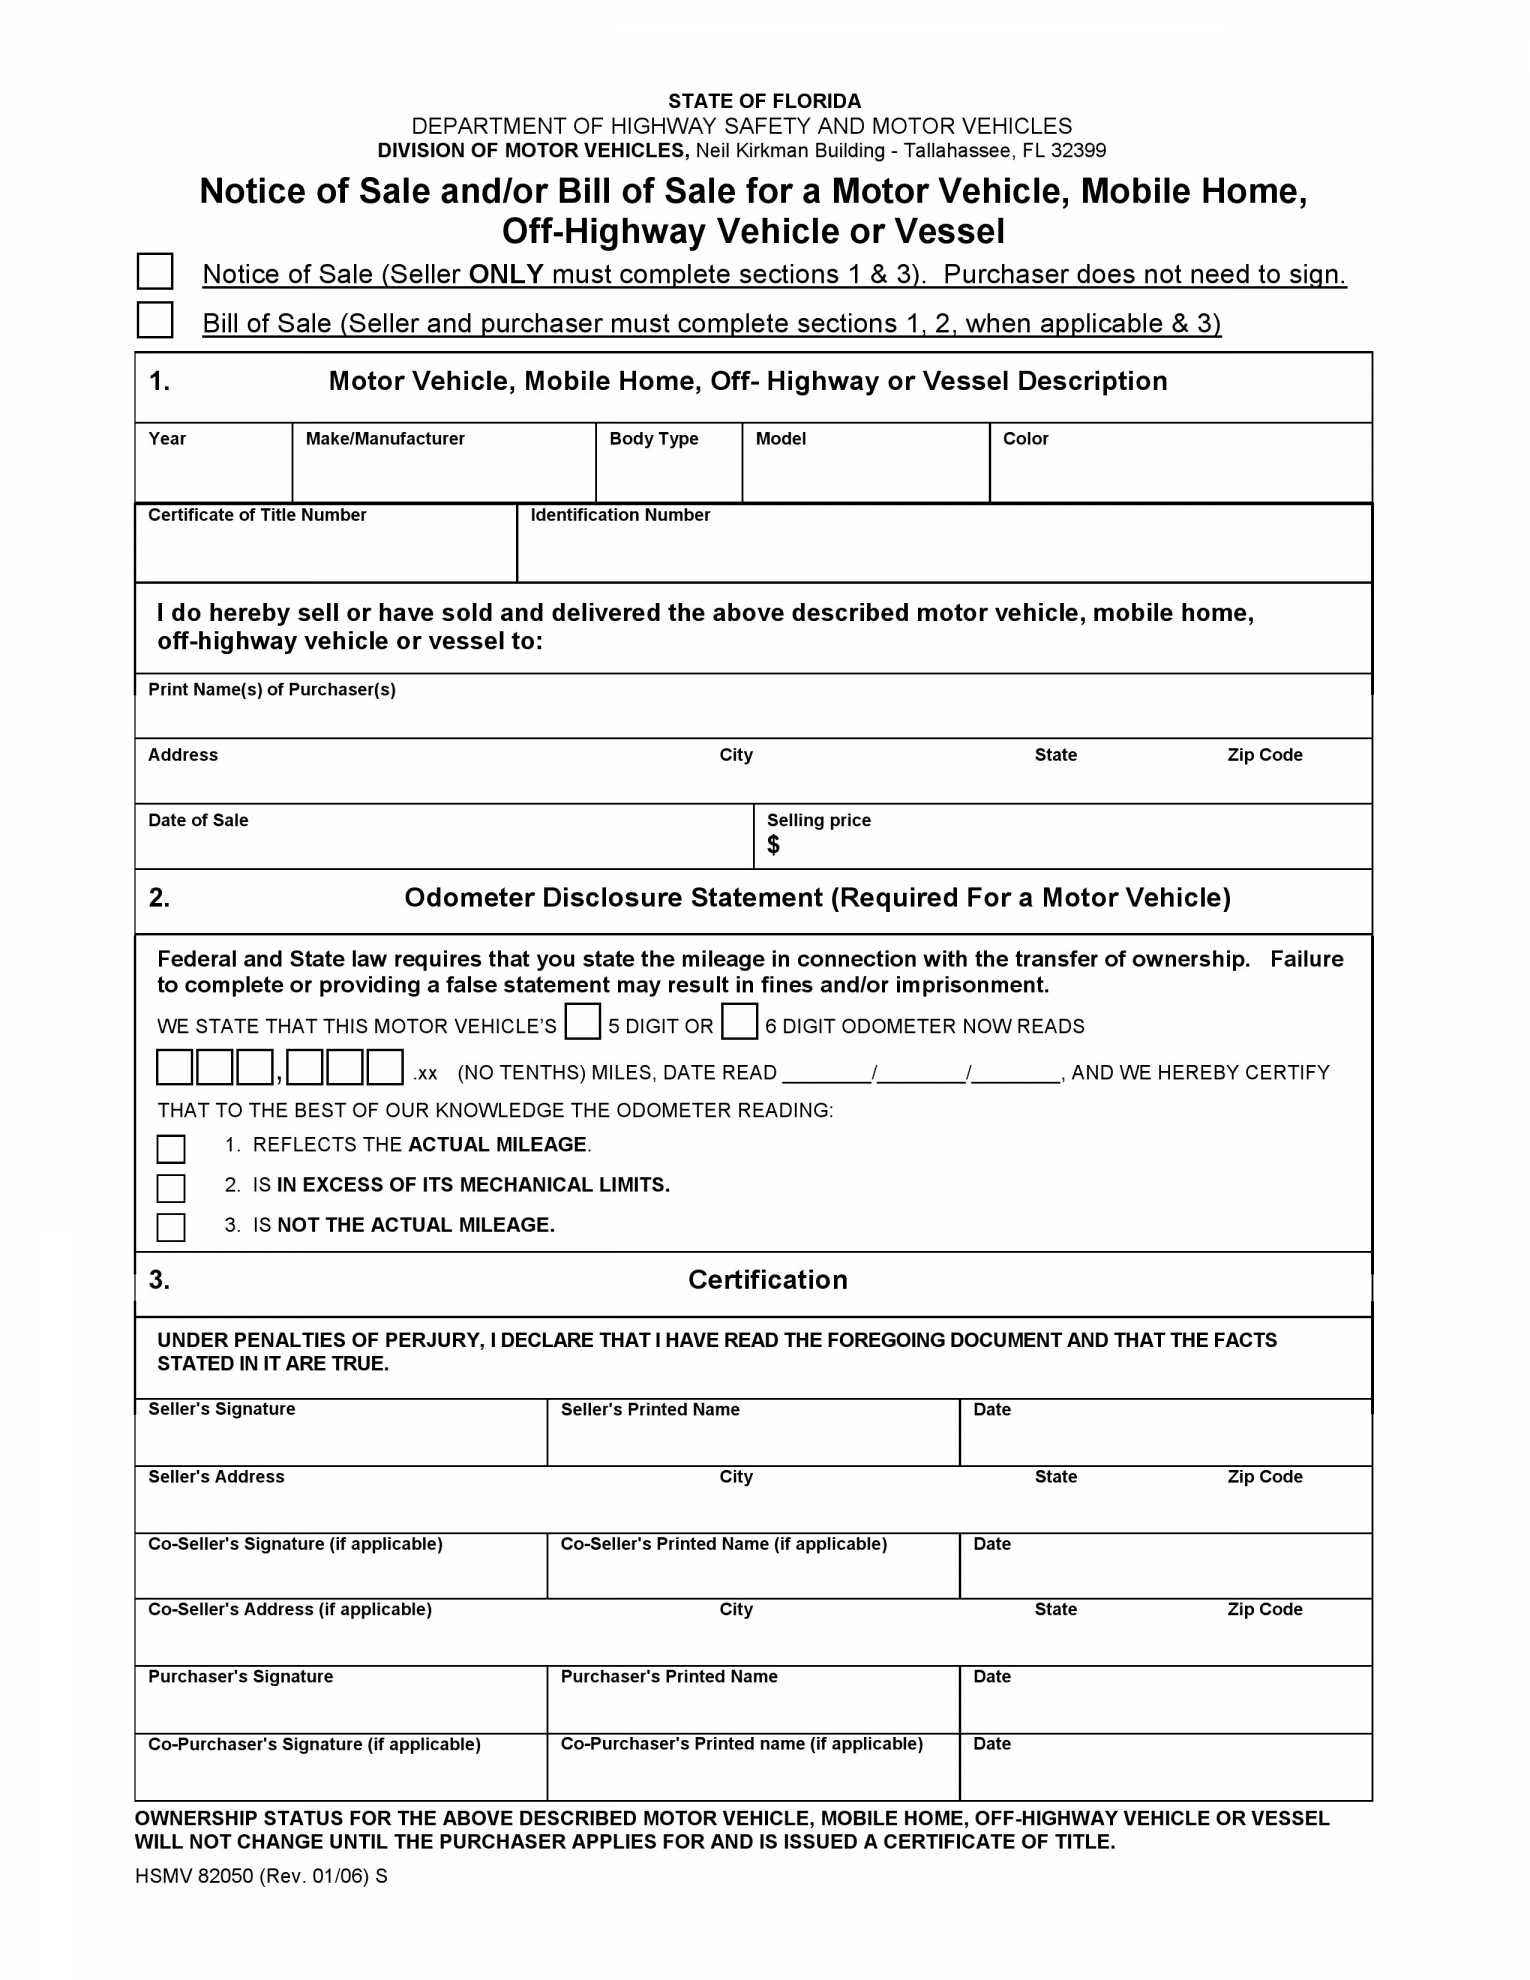 Free Printable Bill Of Sale Form For Mobile Home And Bill Of Sale - Free Printable Bill Of Sale For Mobile Home